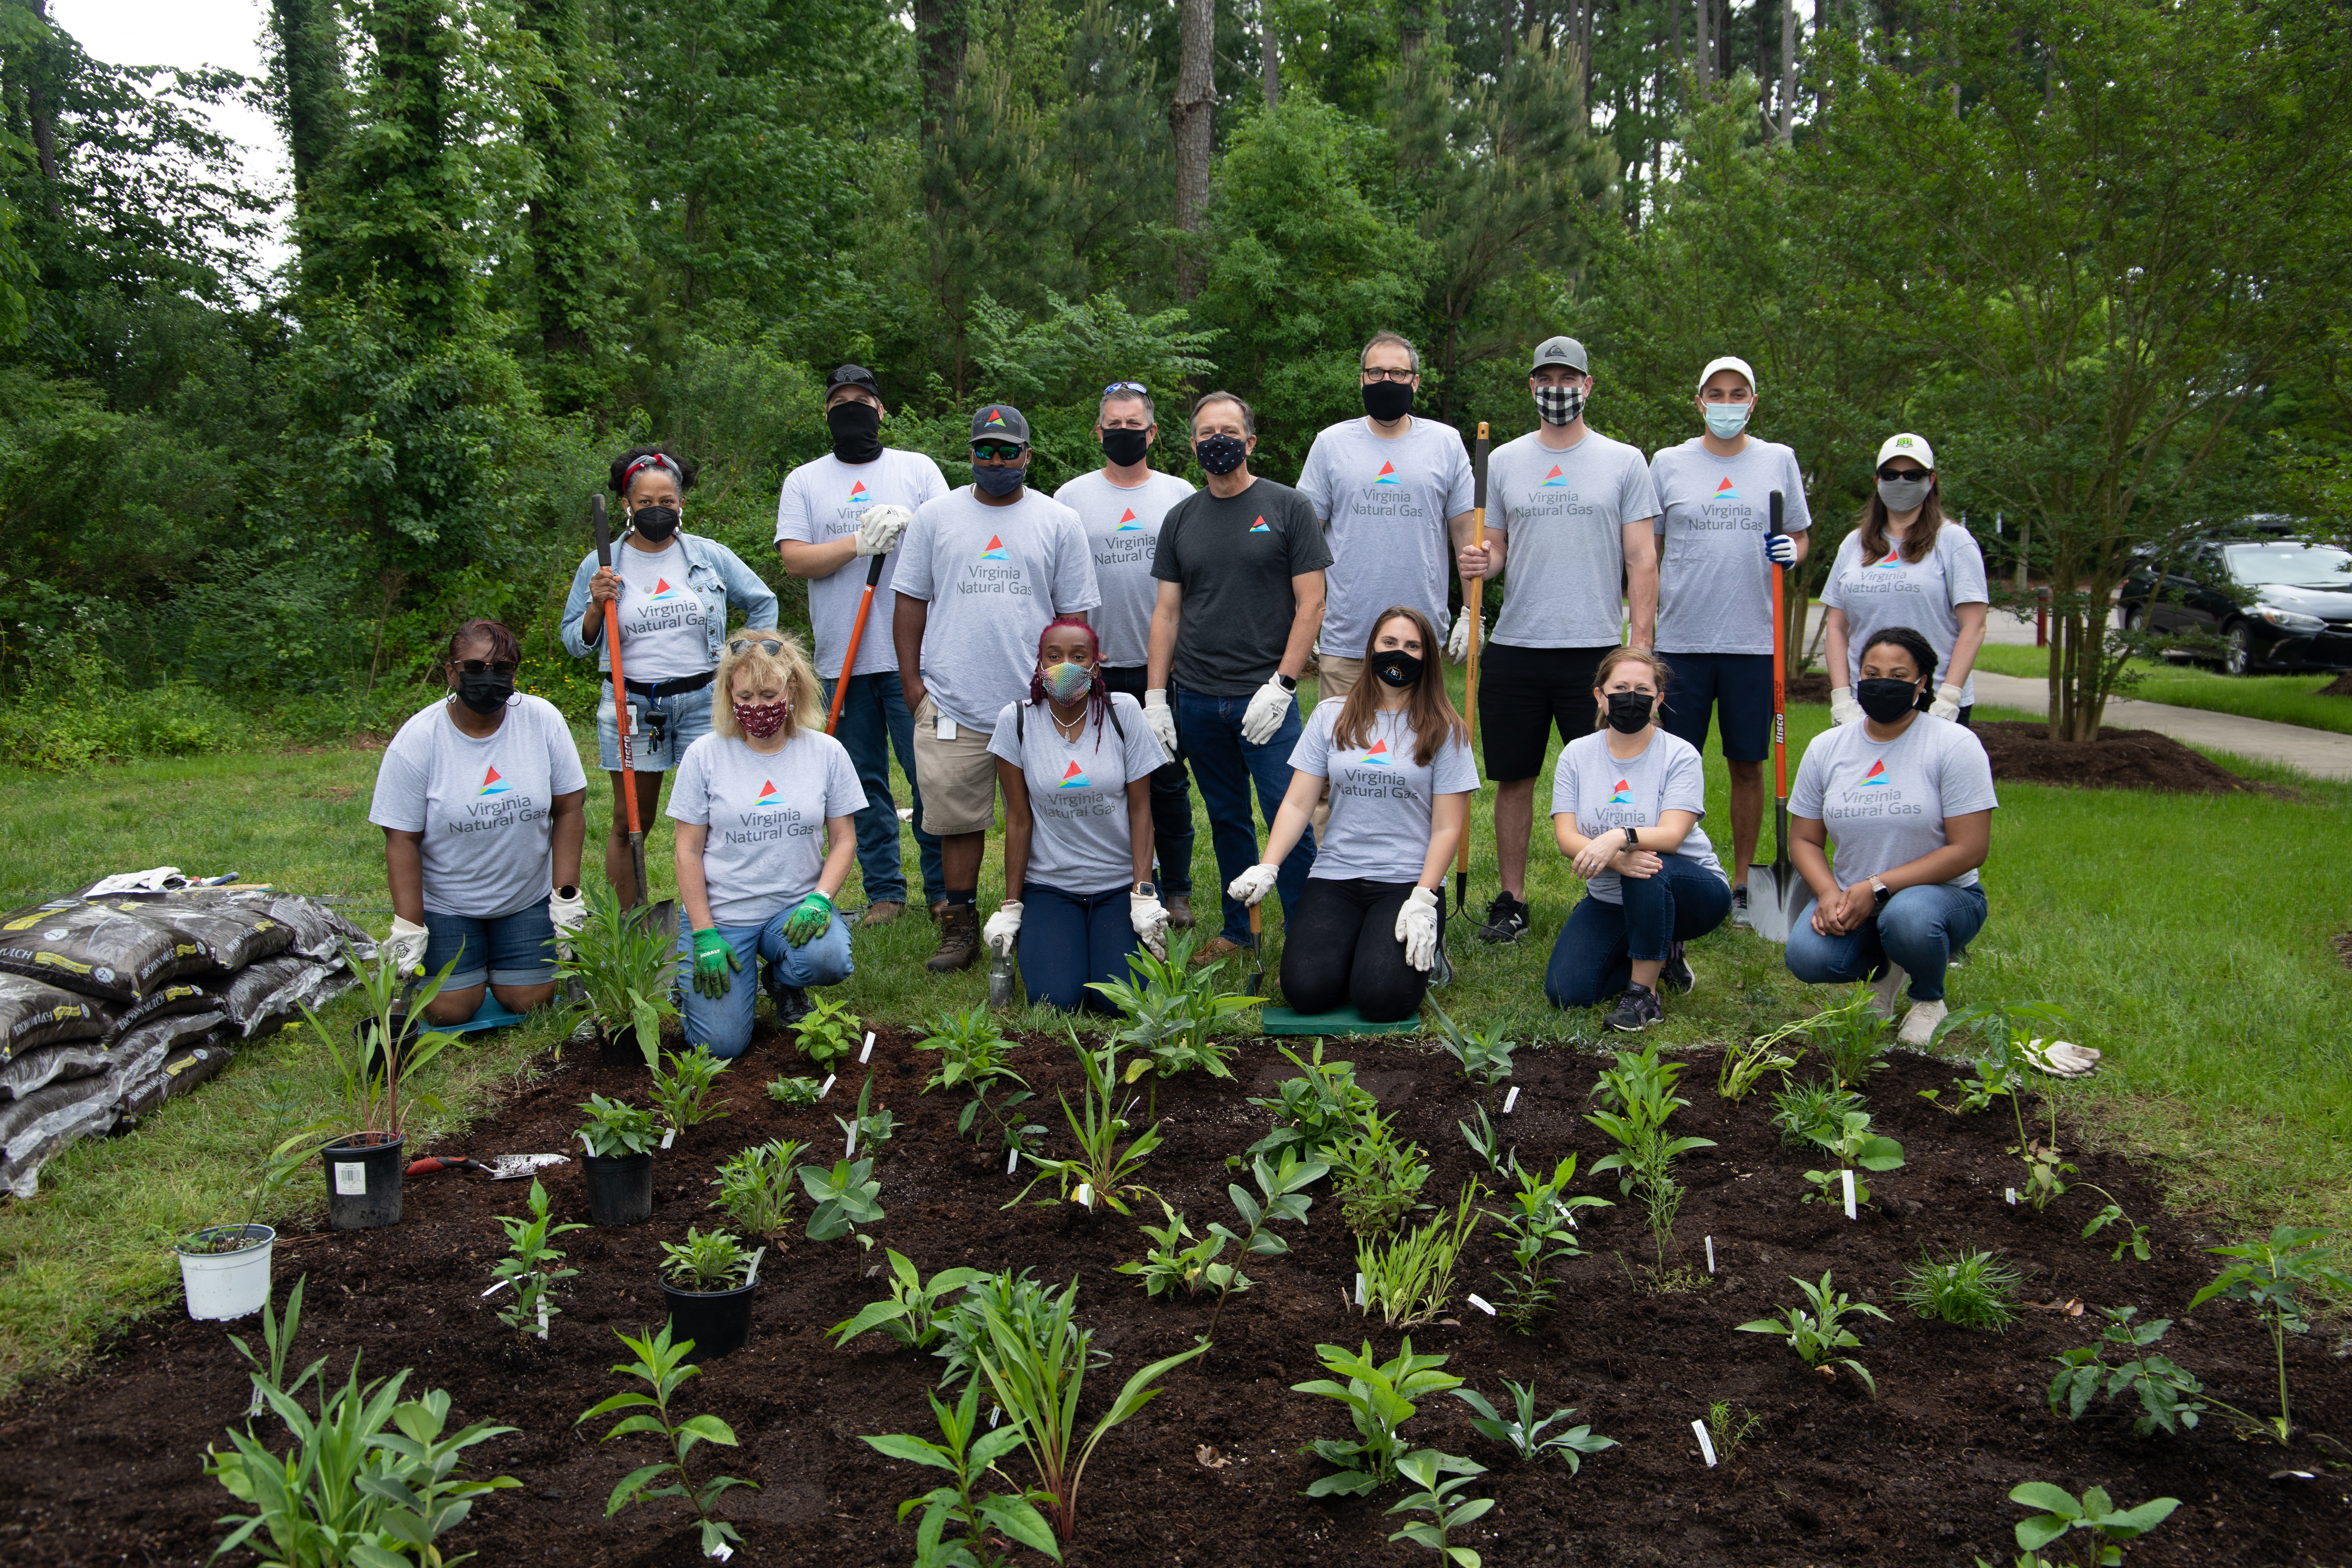 Pollinator Gardens planted by Virginia Natural Gas volunteers will support life cycle of monarch butterflies